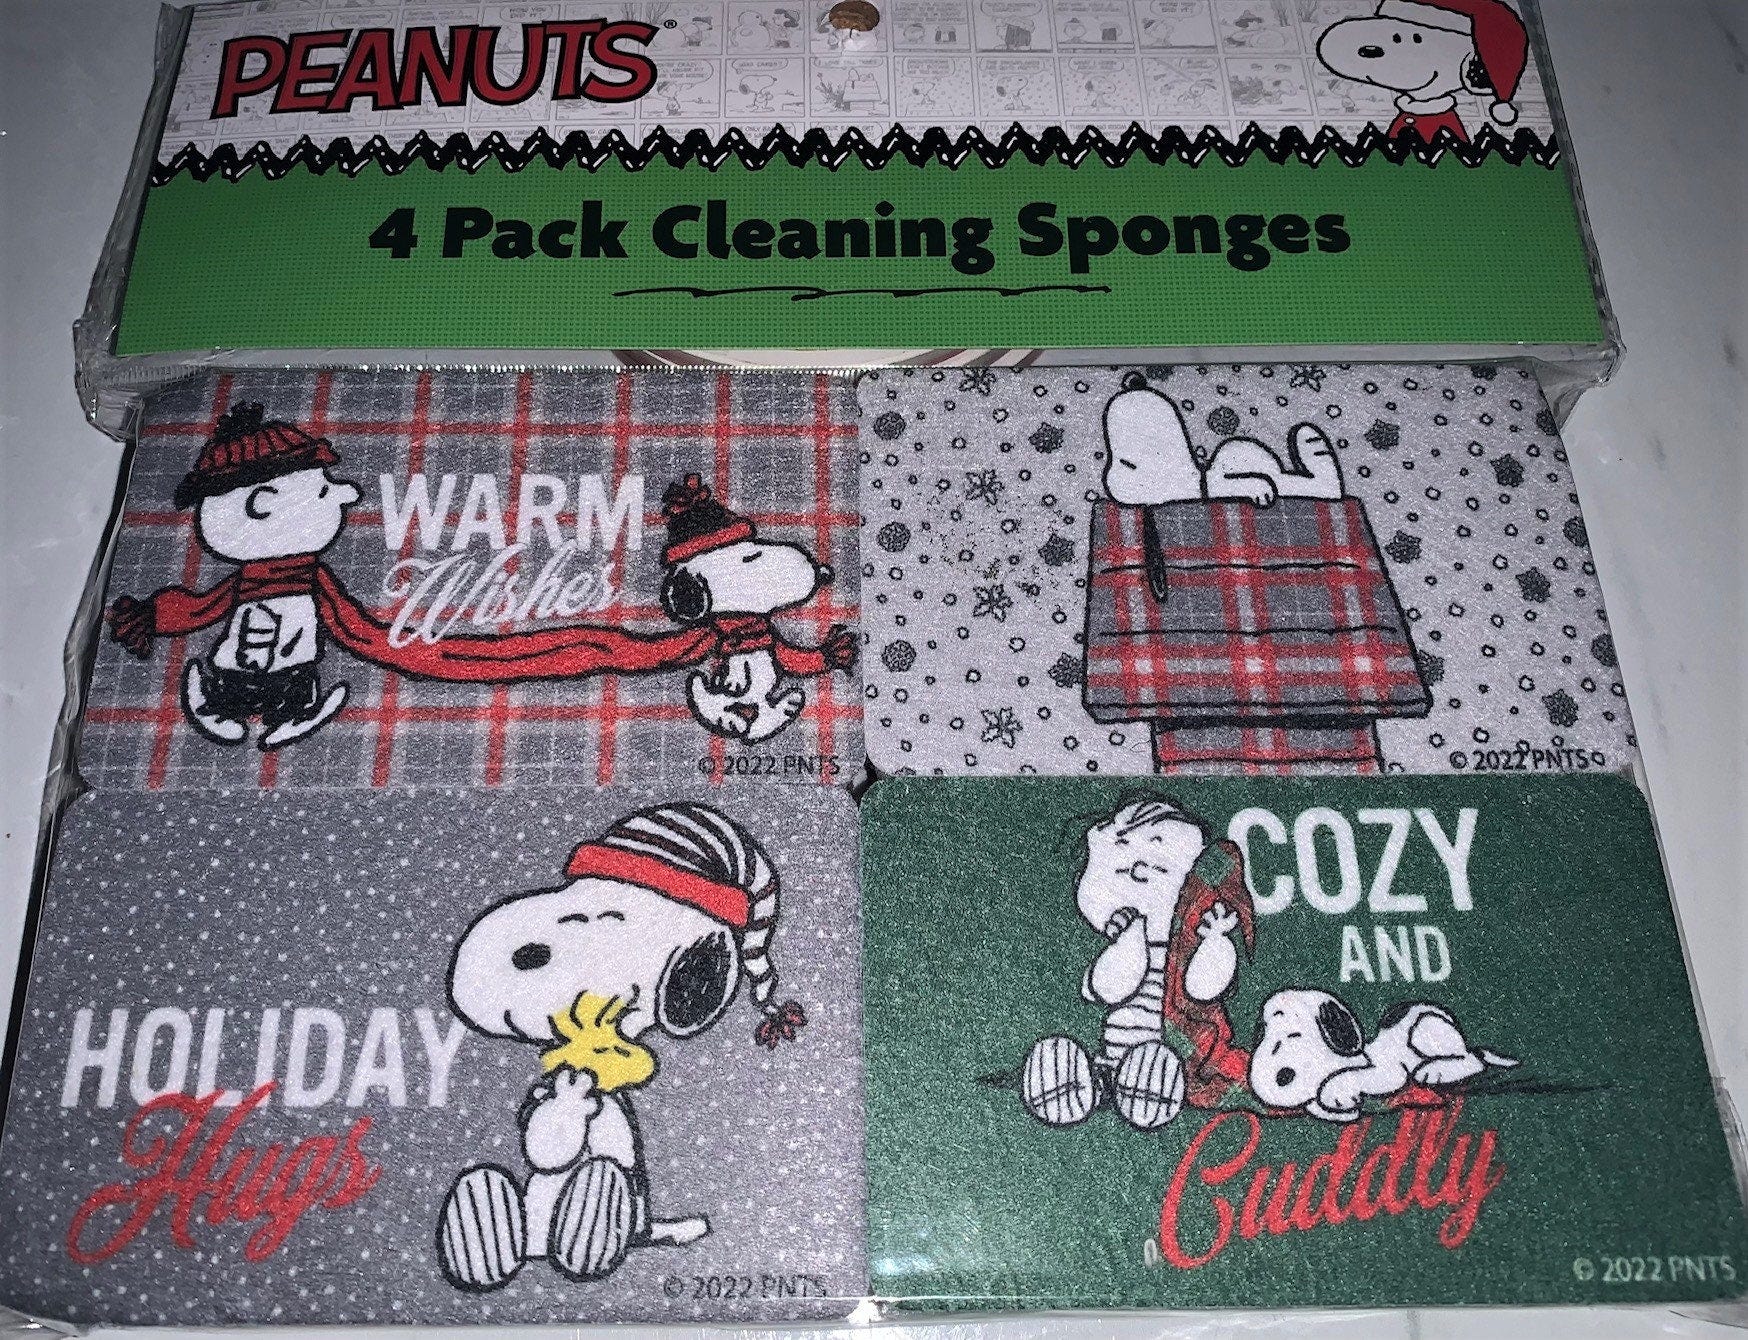 Peanuts Snoopy Christmas Warm Wishes 4 Pack Cleaning Sponges